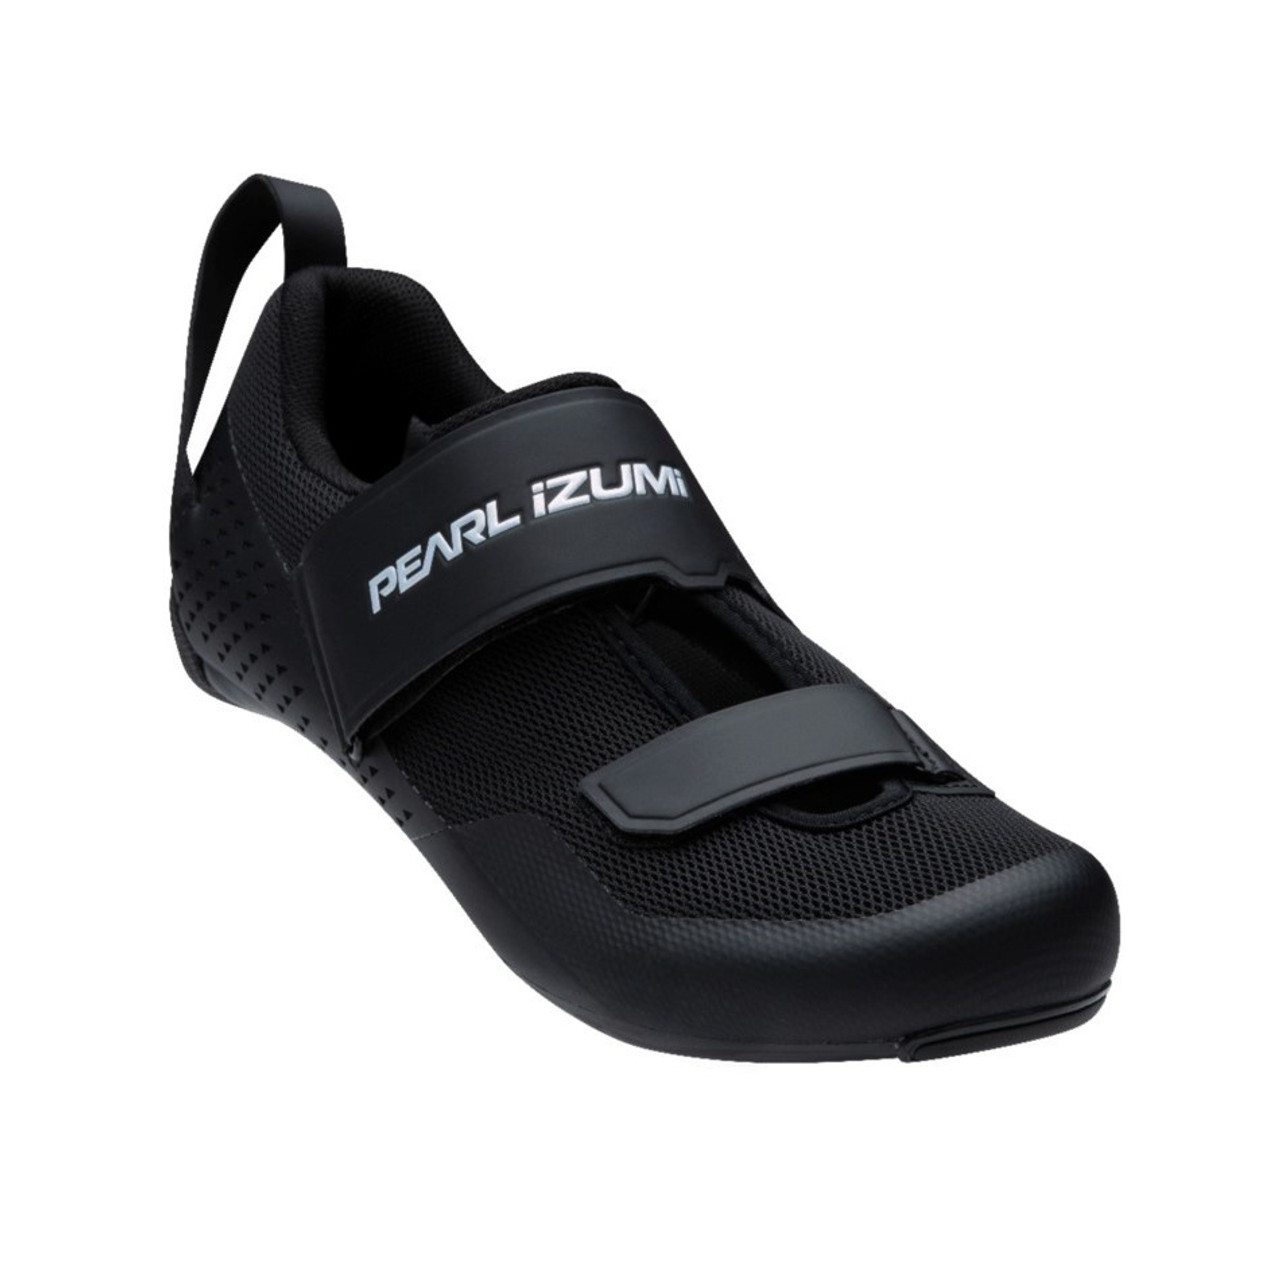 Pearl Izumi Select Road III cycling shoes review